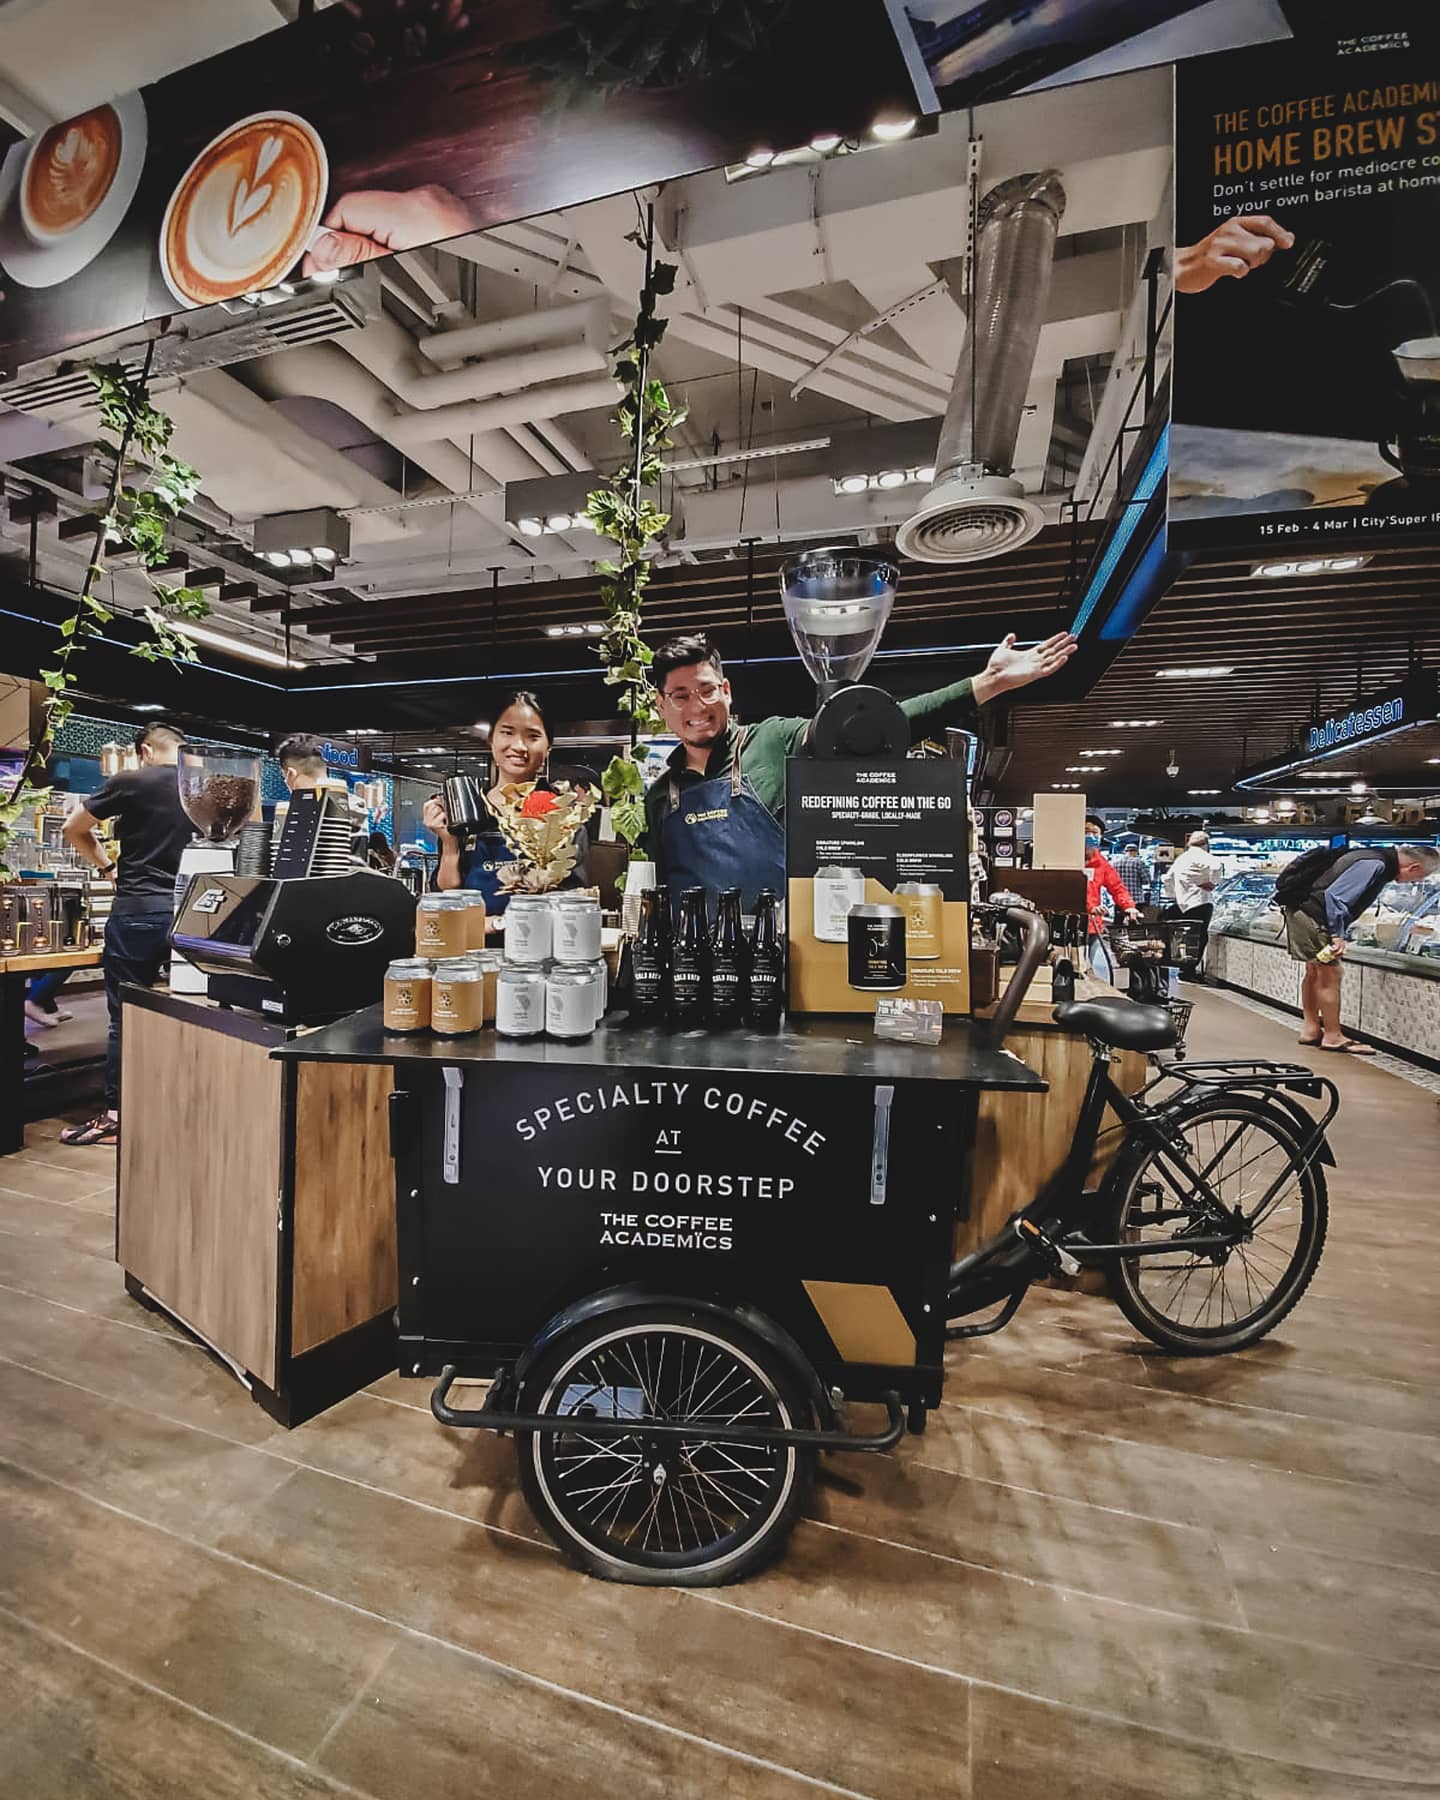 We are brewing at IFC Mall @CitySuperHK! Pop by our Home Brew Station to enjoy specialty coffee that you can indulge at home. Snag yourself our latest, most delightful ”Cold Brew In A Can”, specialty coffee in a cone, single origin beans, eco-friendly coffee capsules, coffee tumblers and more.  We’ve got you covered at @hkifcmall City’Super’s Coffee Festival. See you at our Home Brew Station!... Date: 15 Feb - 4 Mar 2020